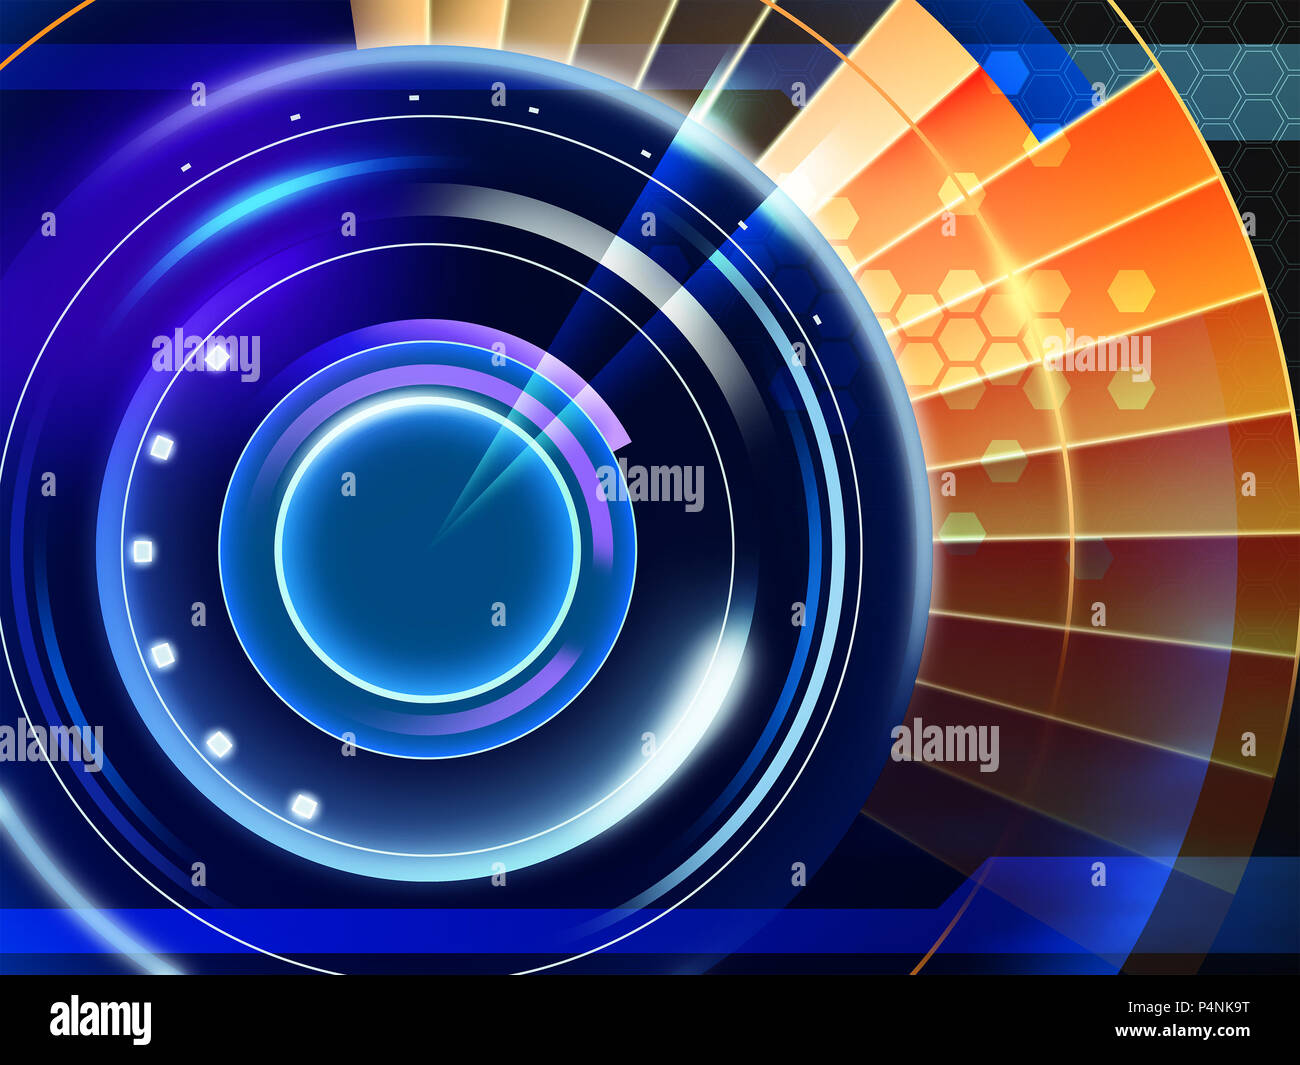 Colorful background with an advanced technology theme. Digital illustration Stock Photo